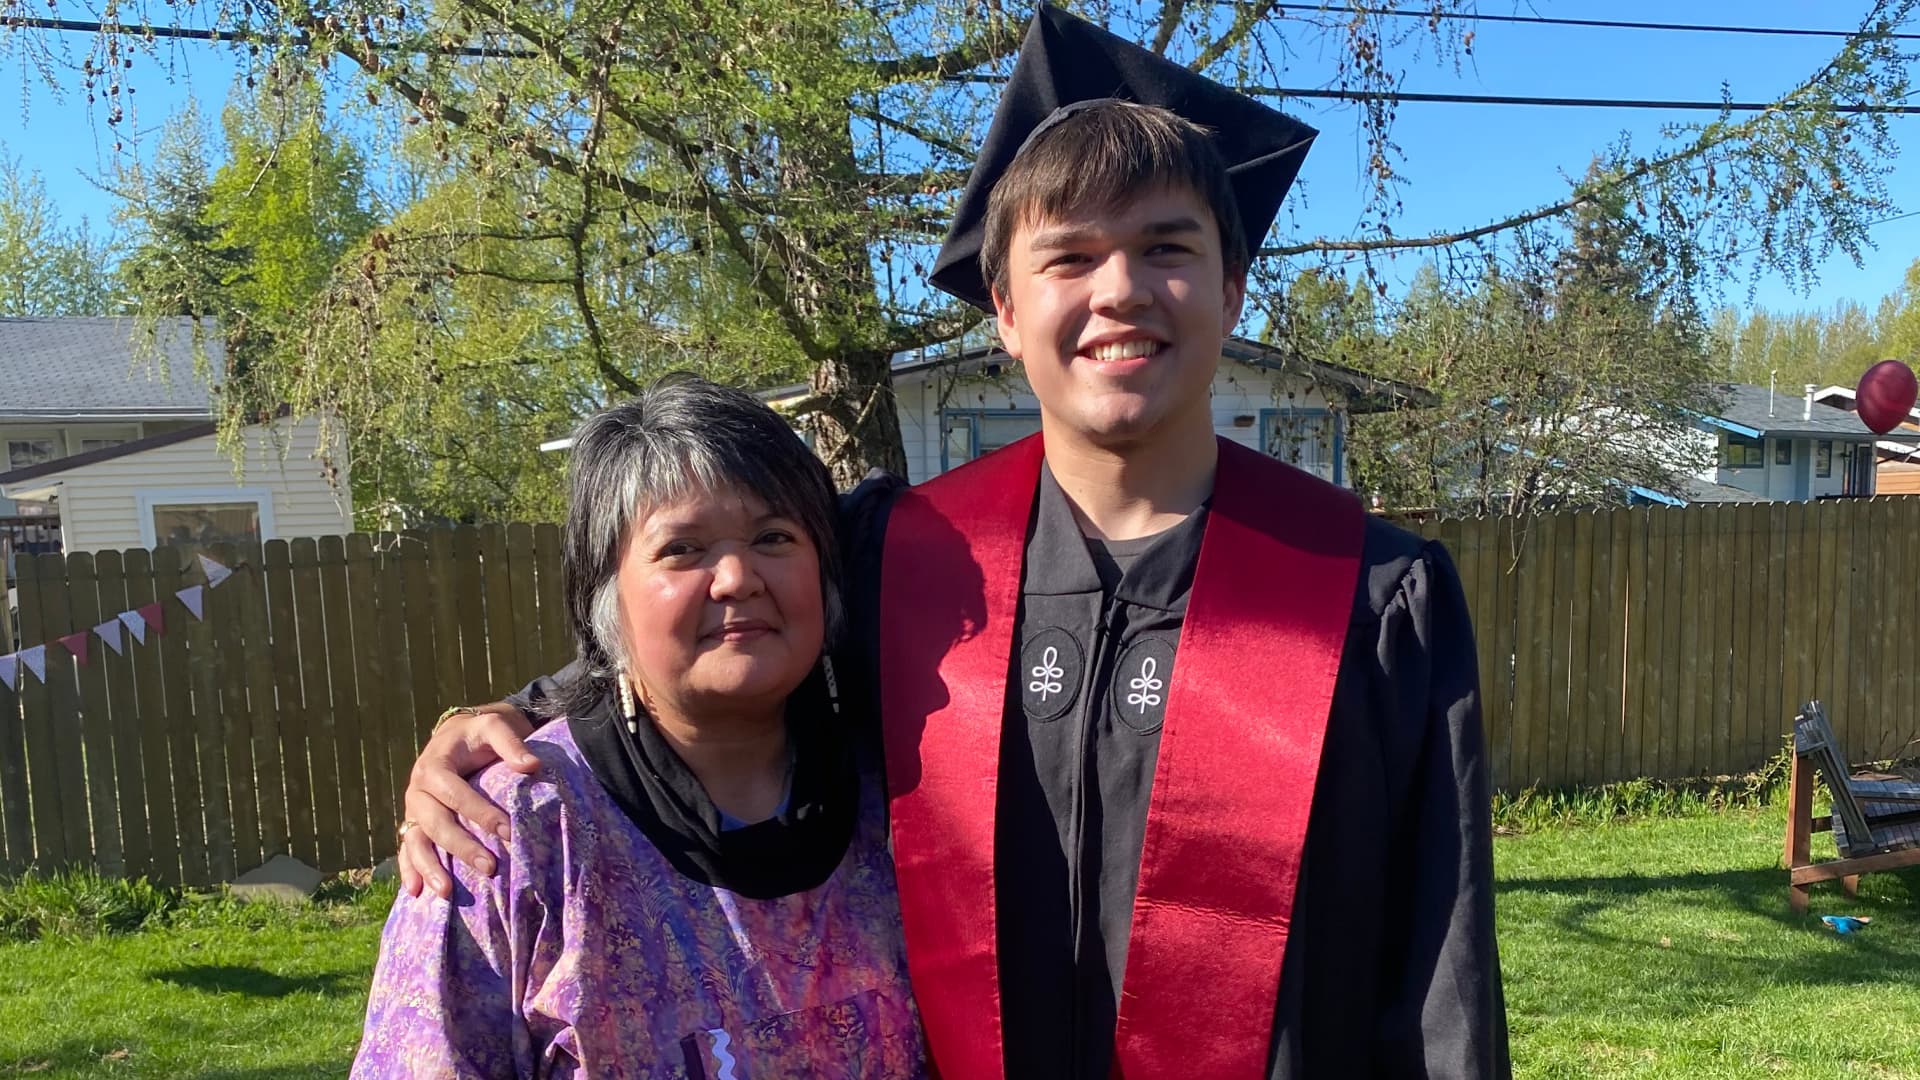 Brandon McIntire pictured with mom Karen is Yup'ik and Unangax̂ from Alaska. McIntire graduated from Harvard with a B.A. in sociology in May 2021.